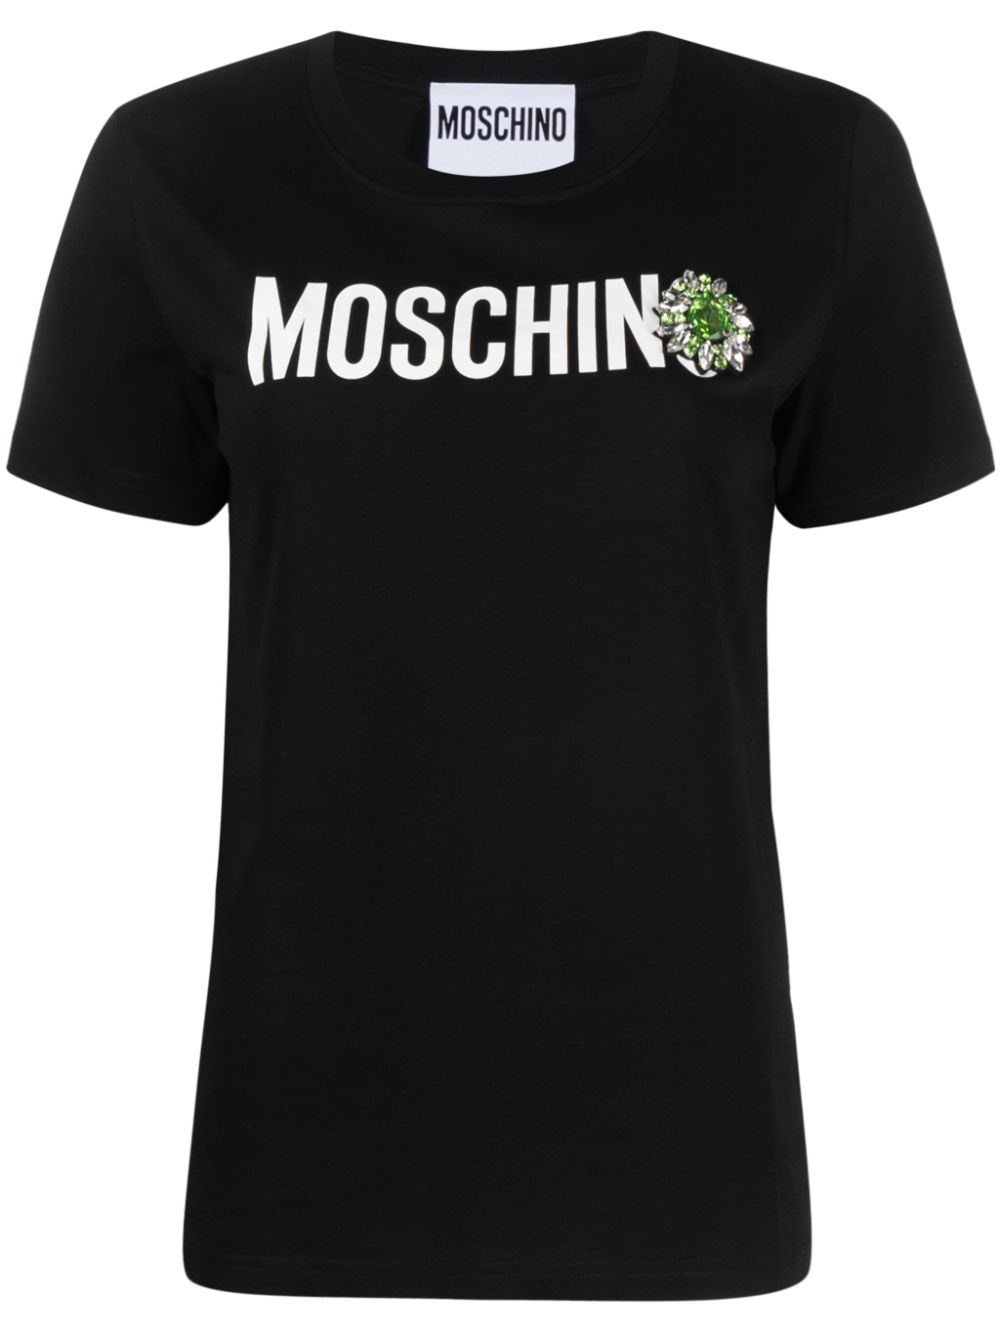 MOSCHINO T-SHIRT WITH BROOCH DETAIL